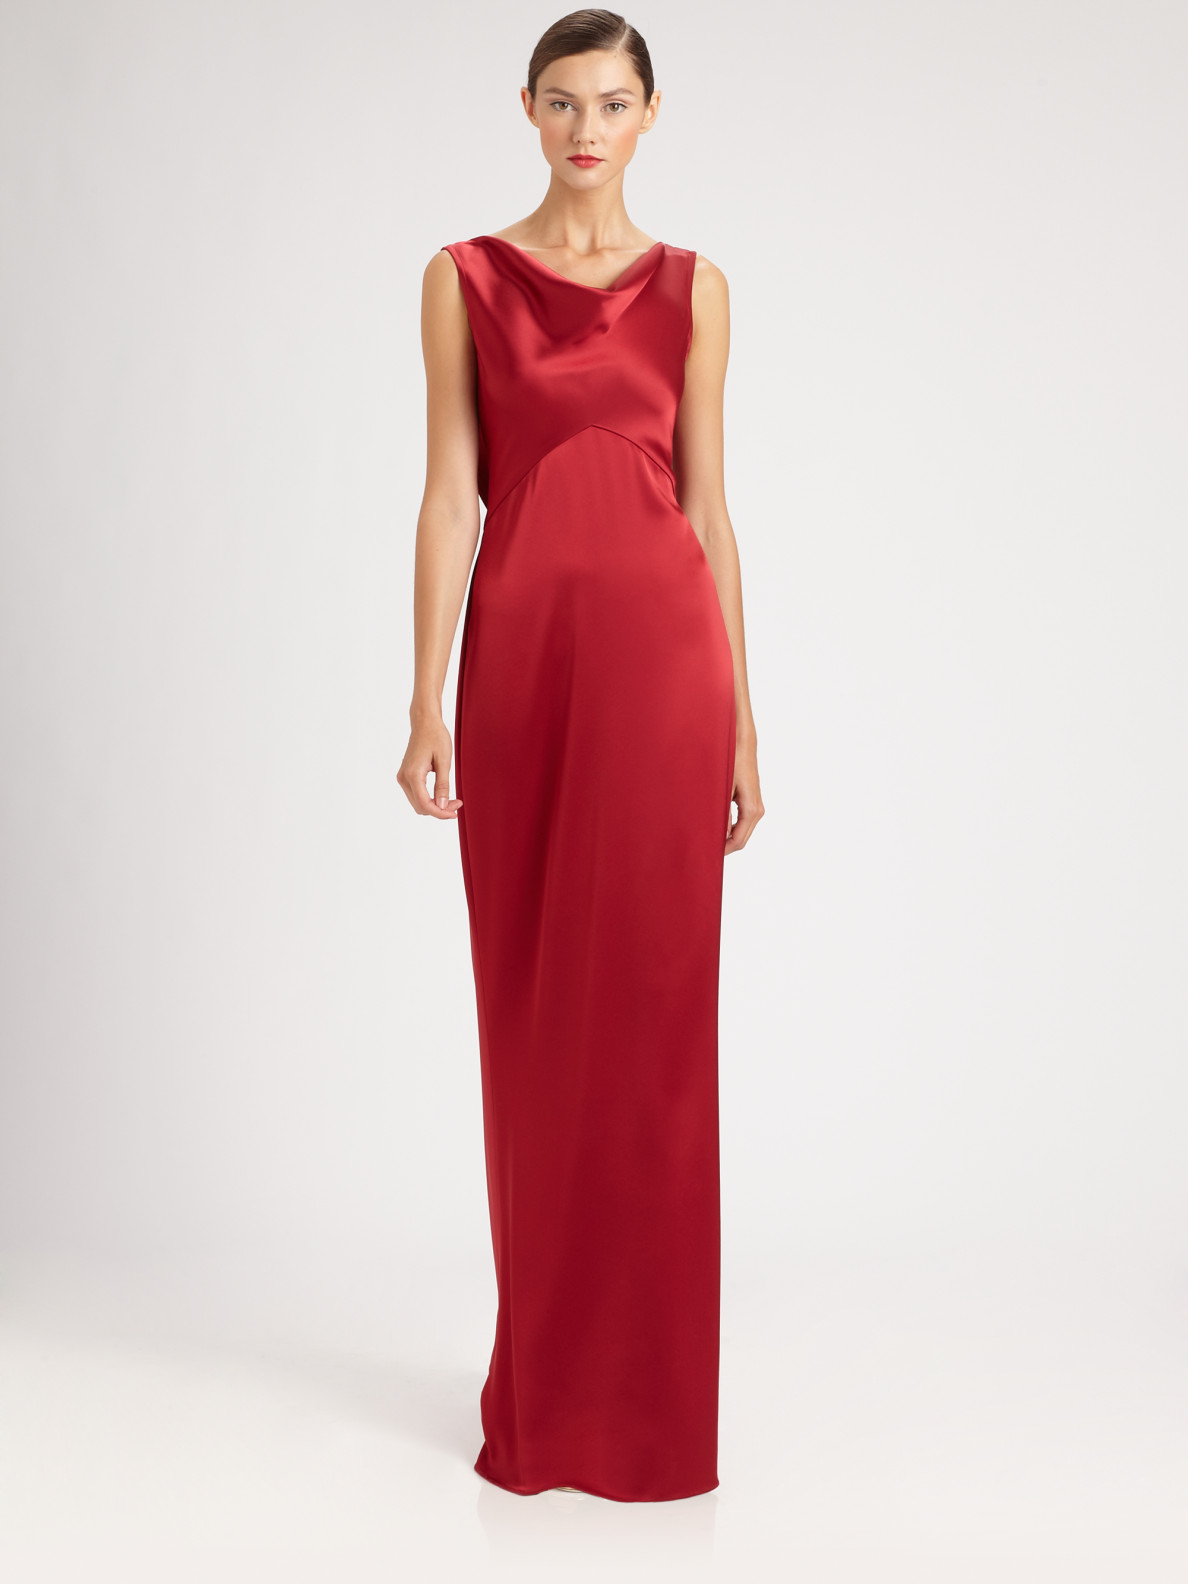 St. John Liquid Satin Gown in Berry (Red) - Lyst